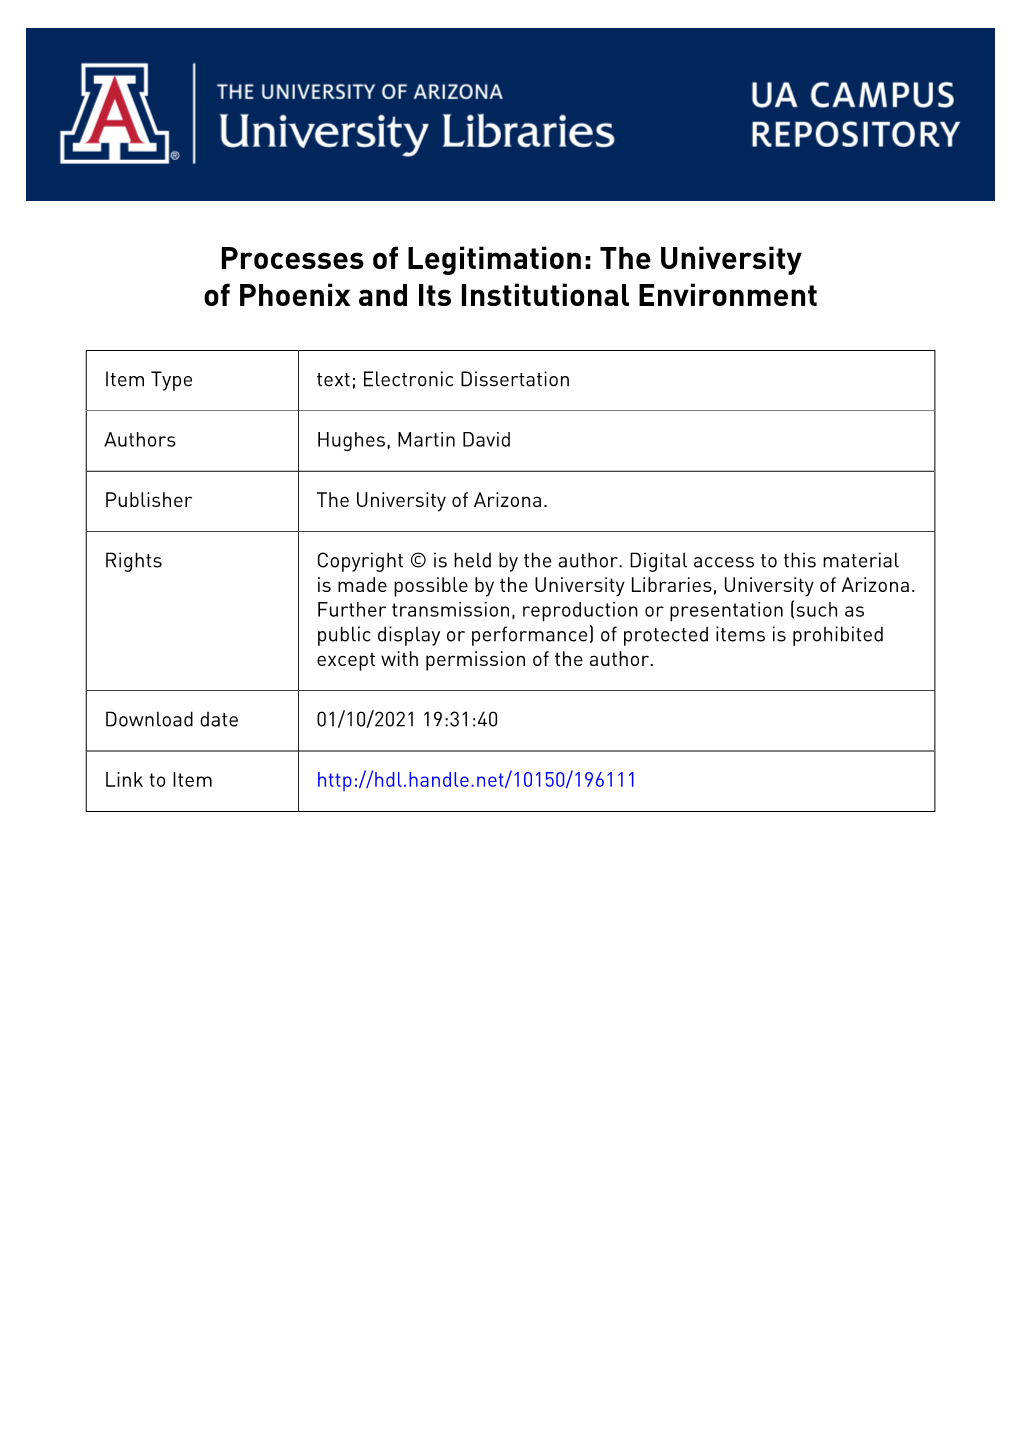 Processes of Legitimation: the University of Phoenix and Its Institutional Environment